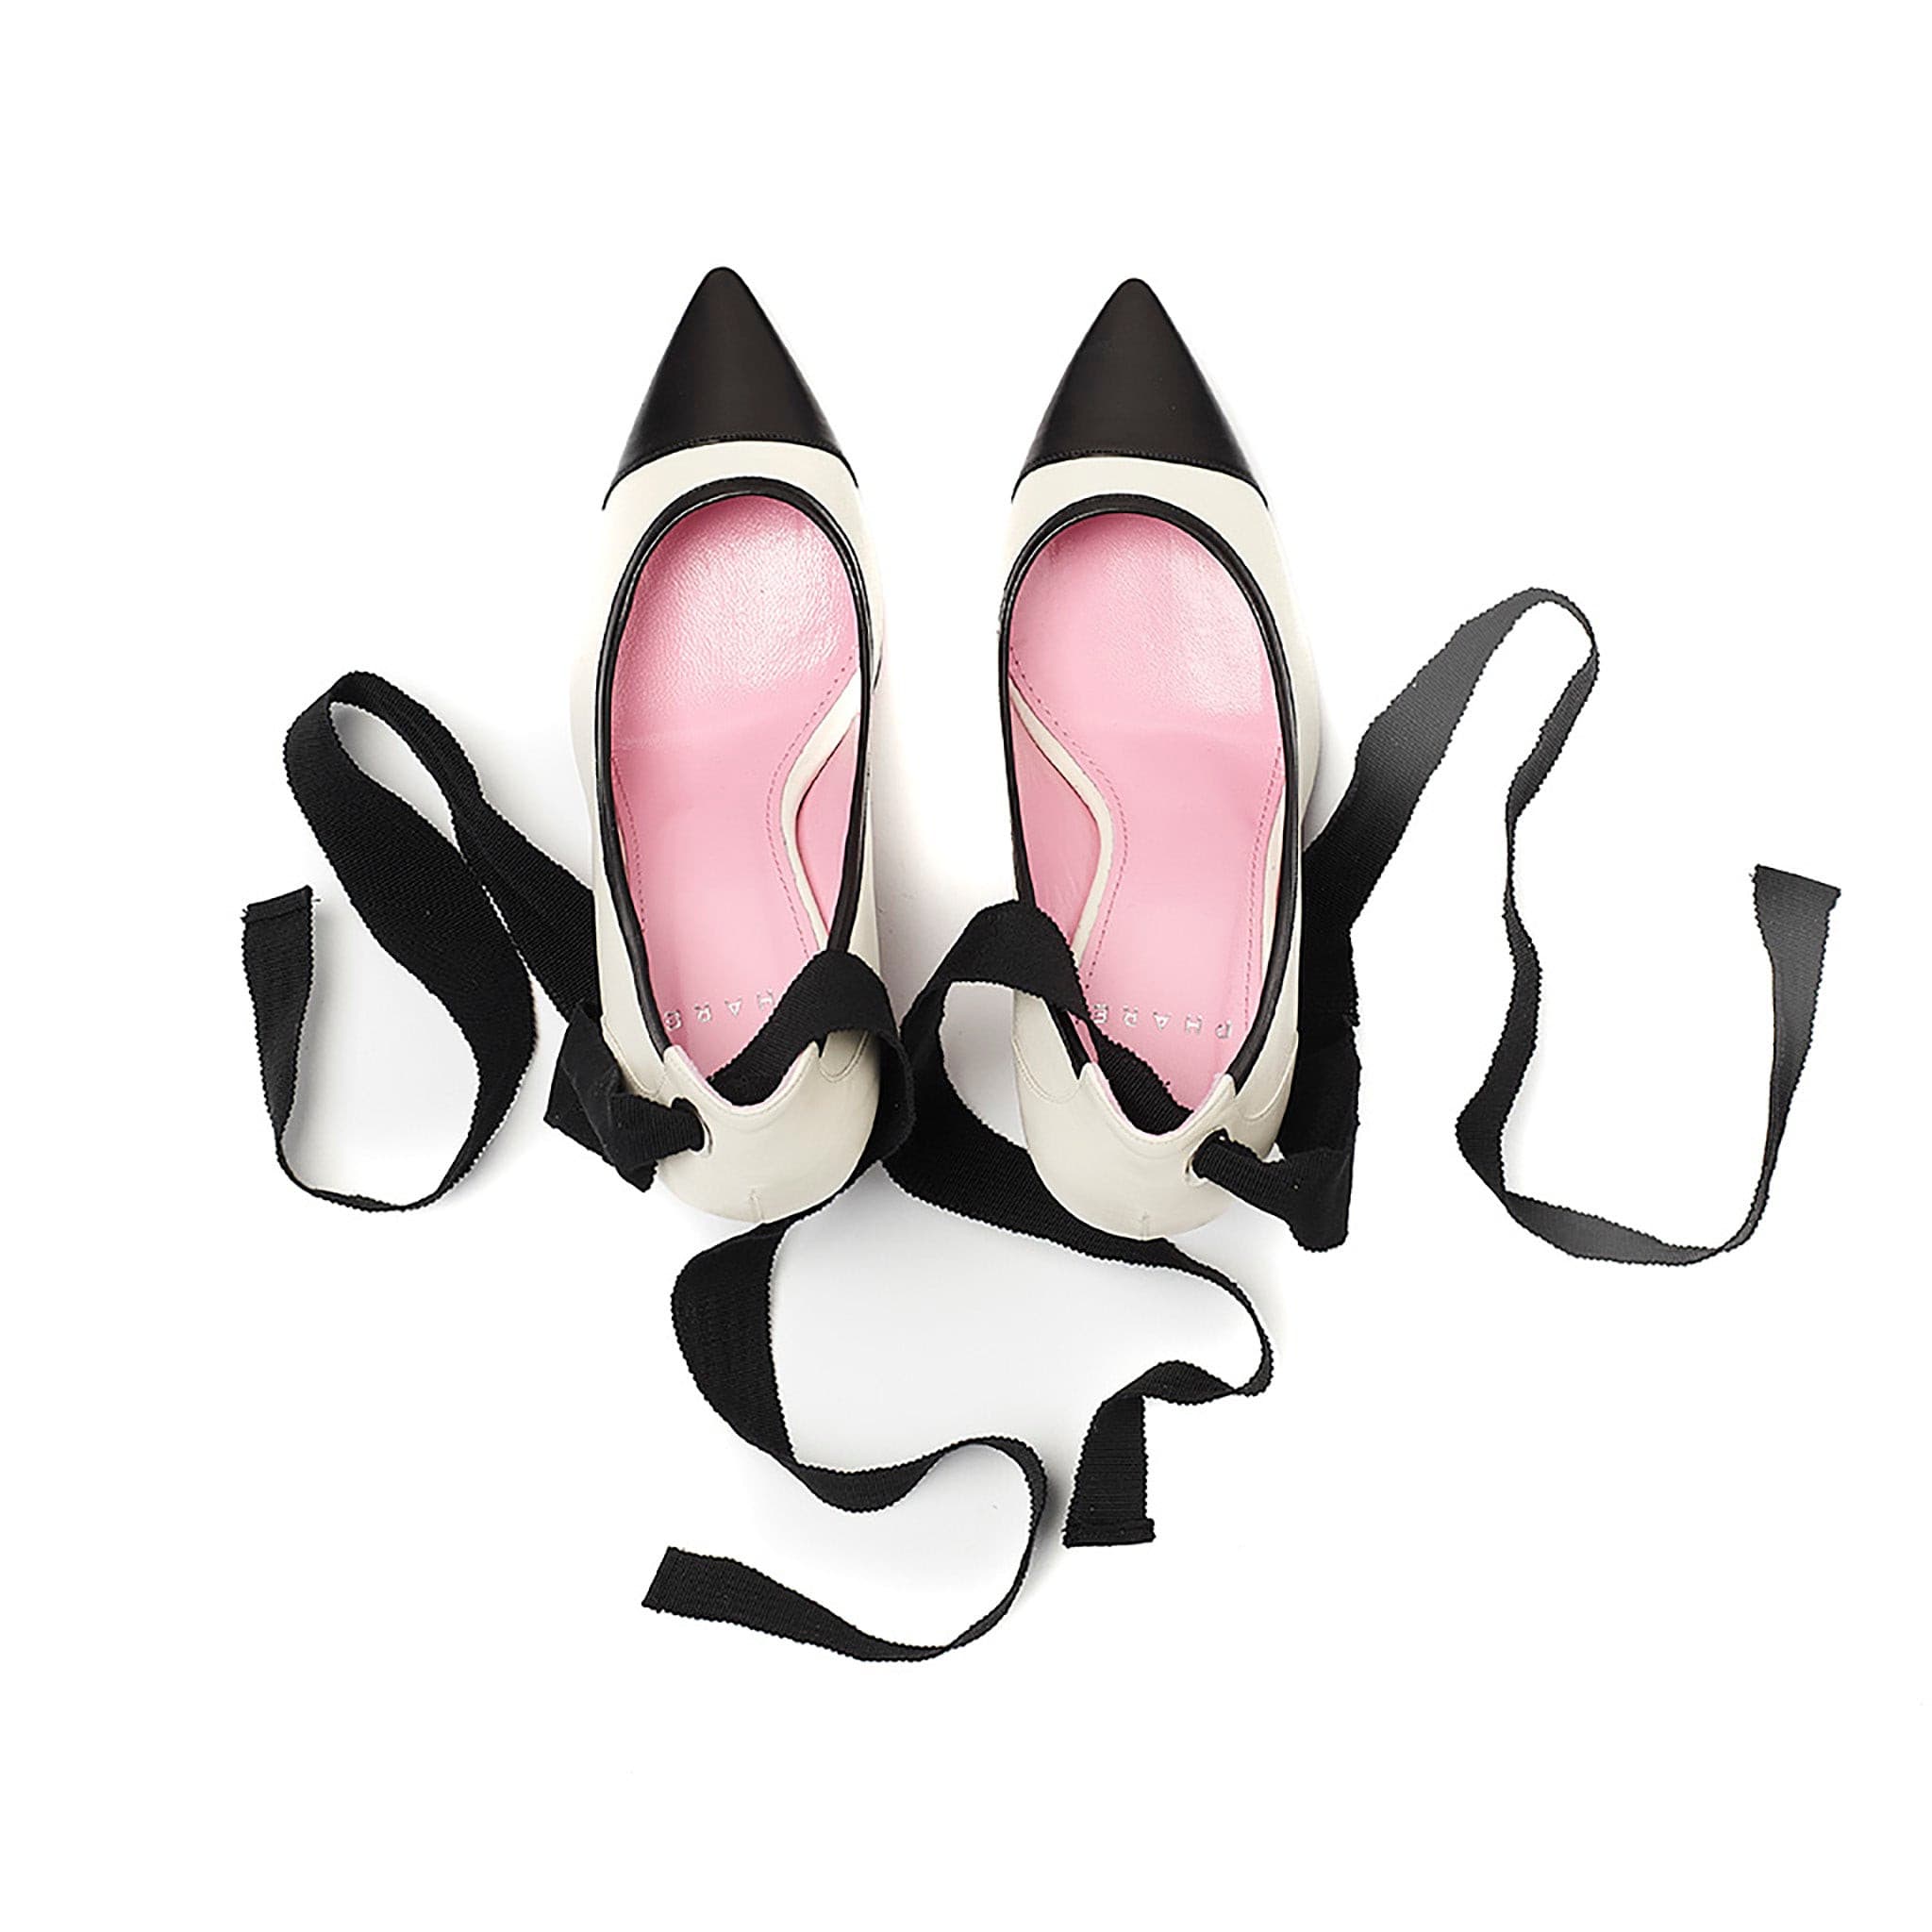 Ribbon tie pump in cream/black leather top view 